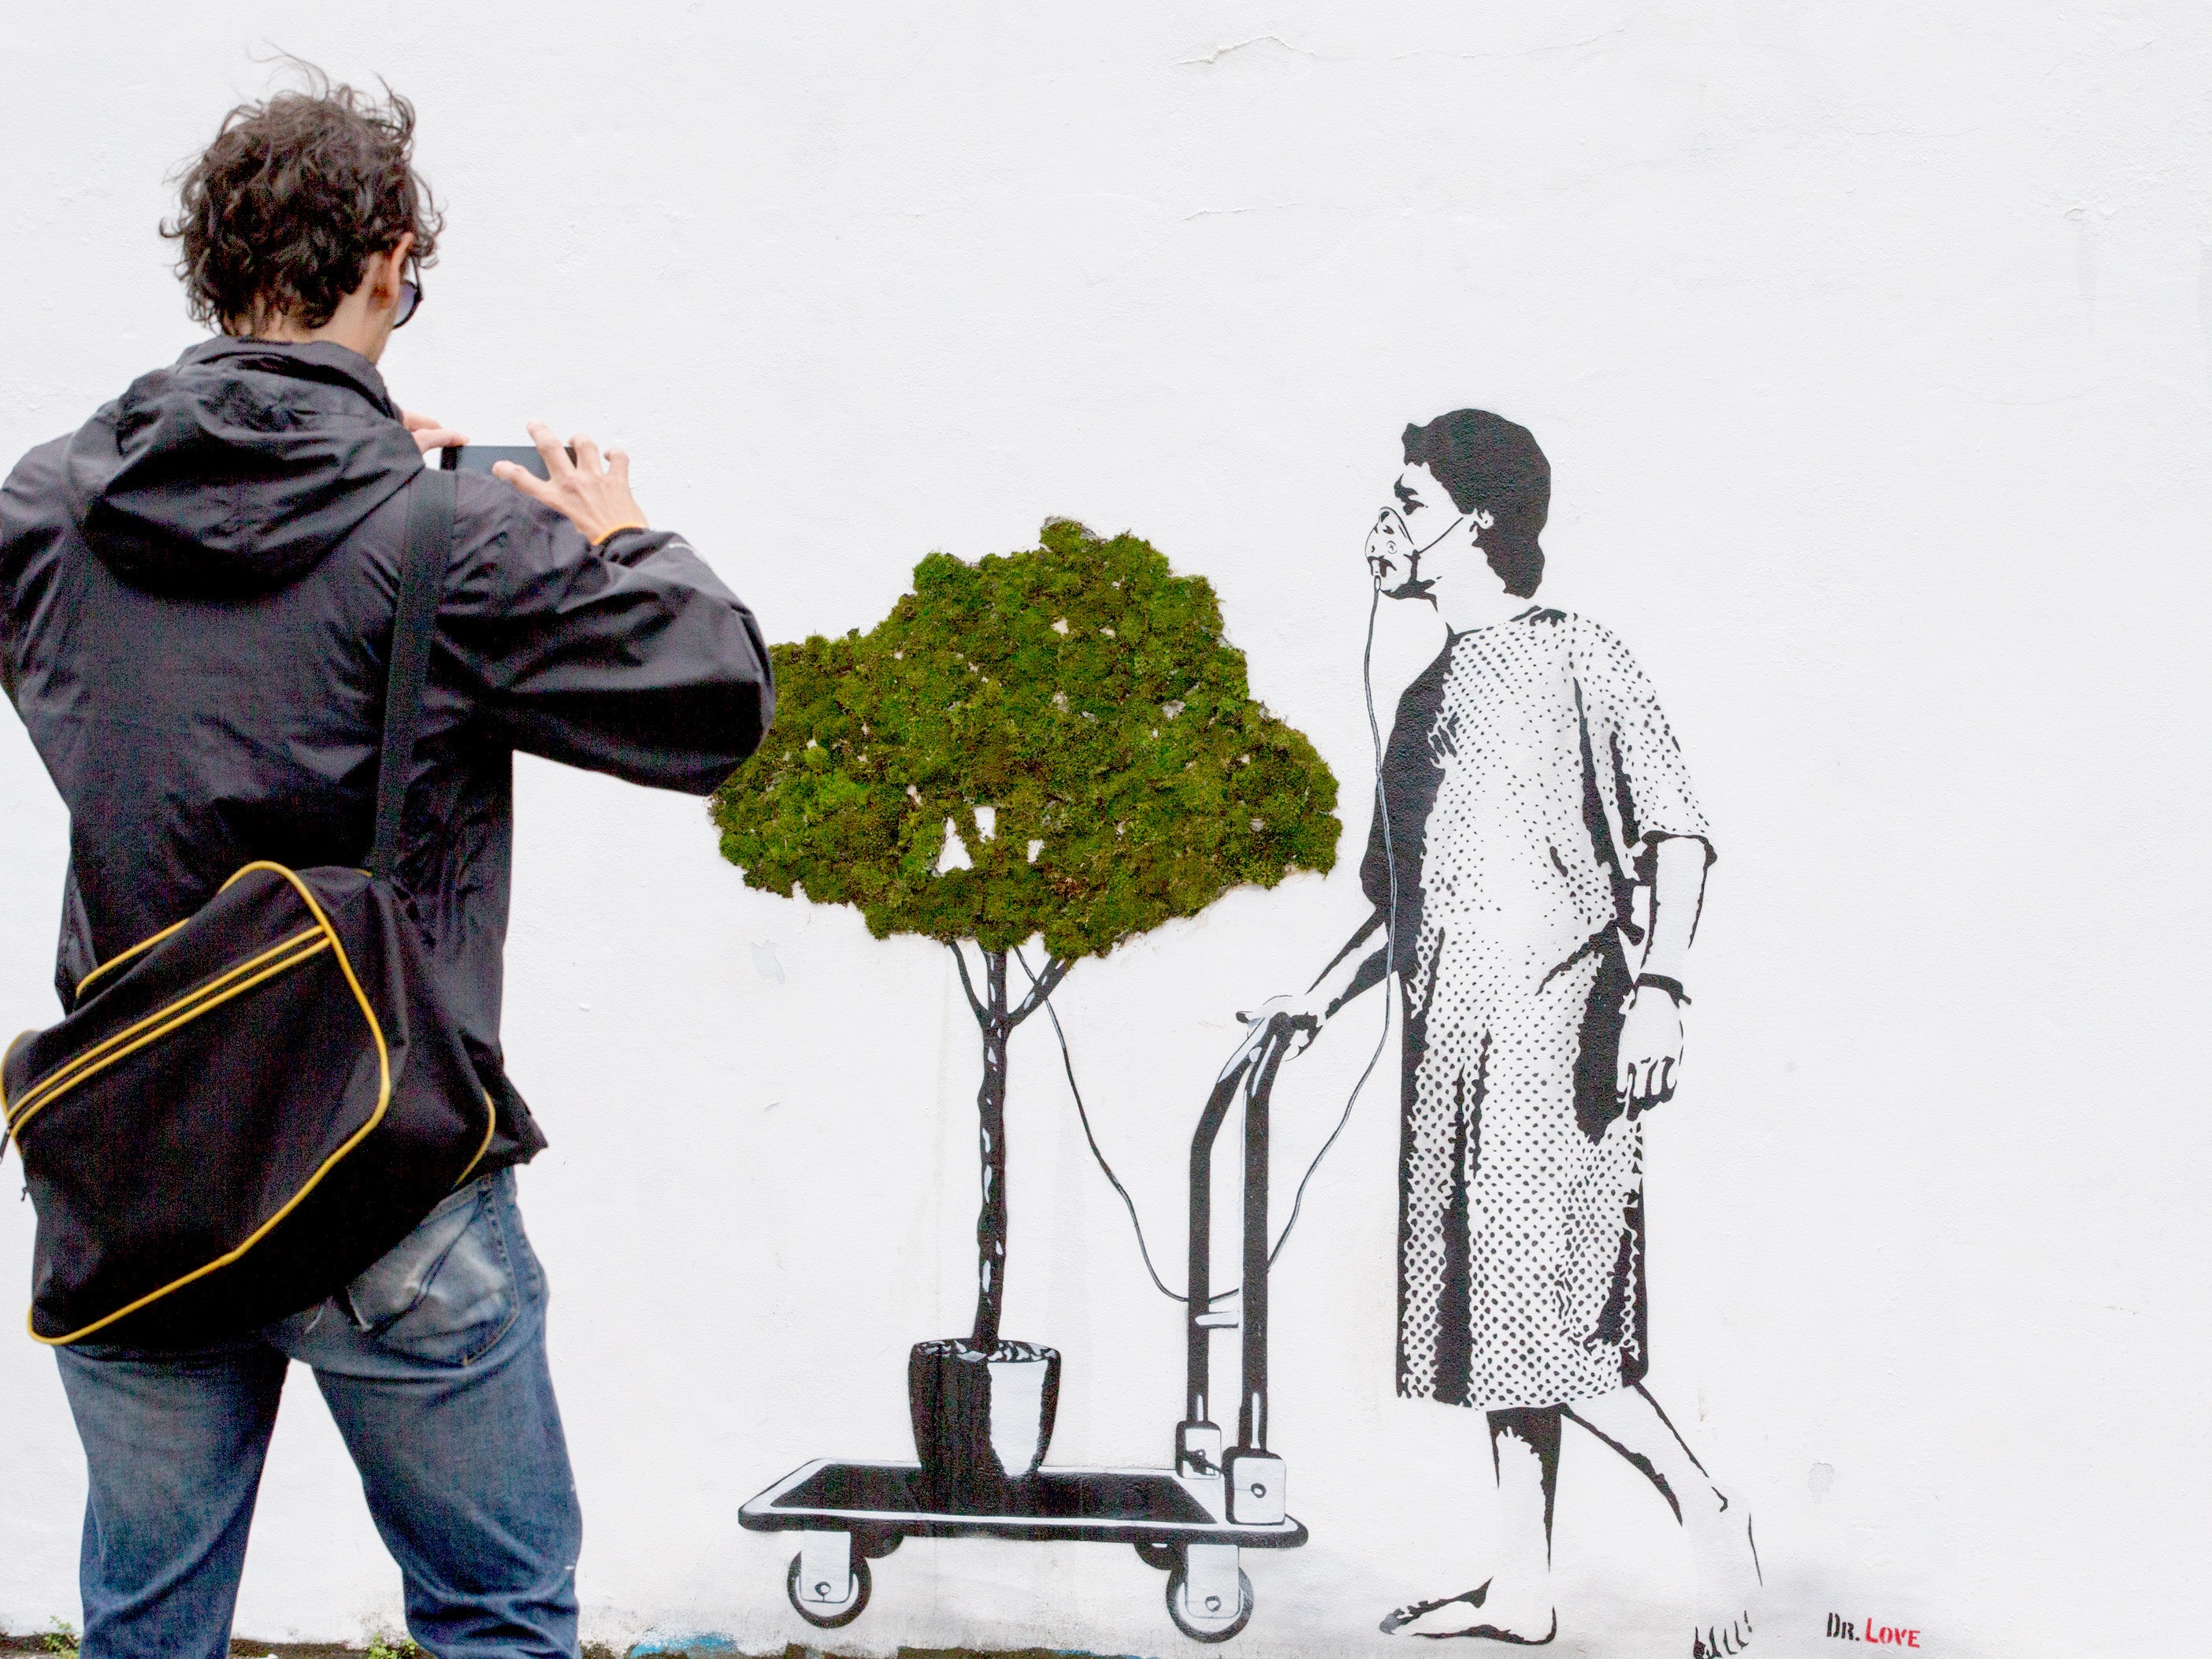 A man takes a photograph in front of a piece of street art as part of the ongoing Upfest 2015 festival being held in Bedminster on July 27, 2015